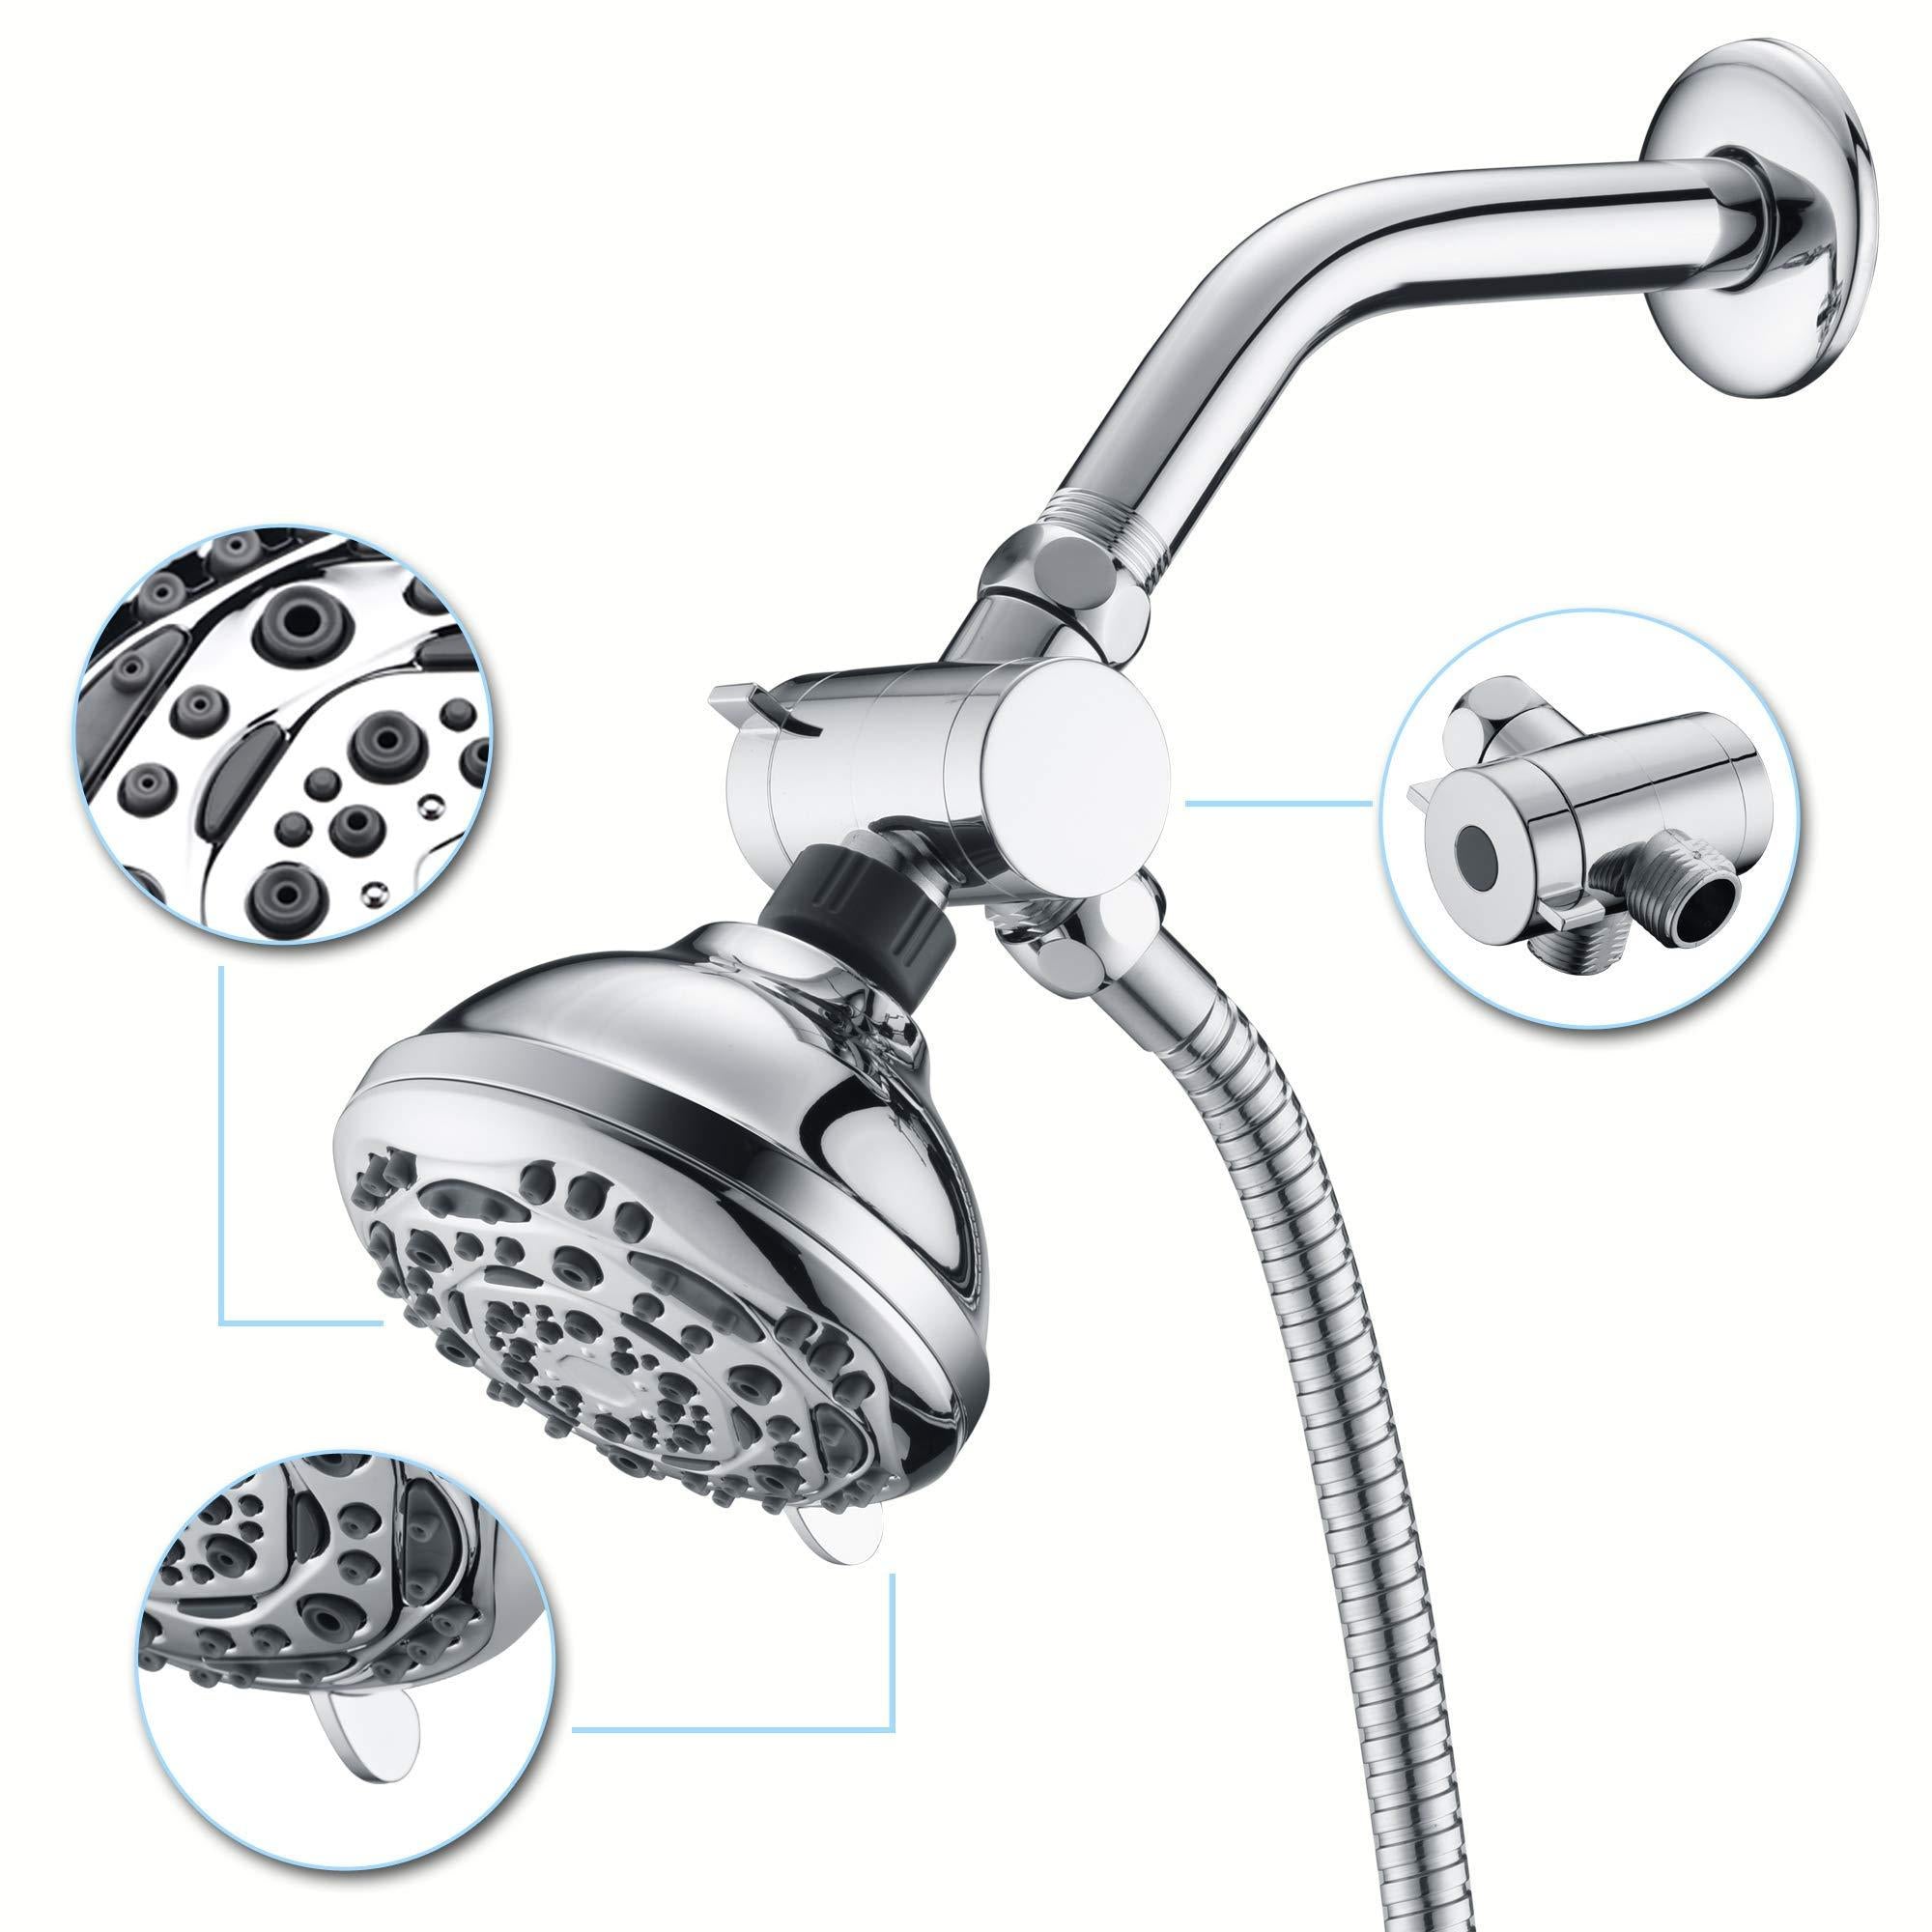 2 in 1 Shower Head Systemwith 7 Spray Setting Moorescarts